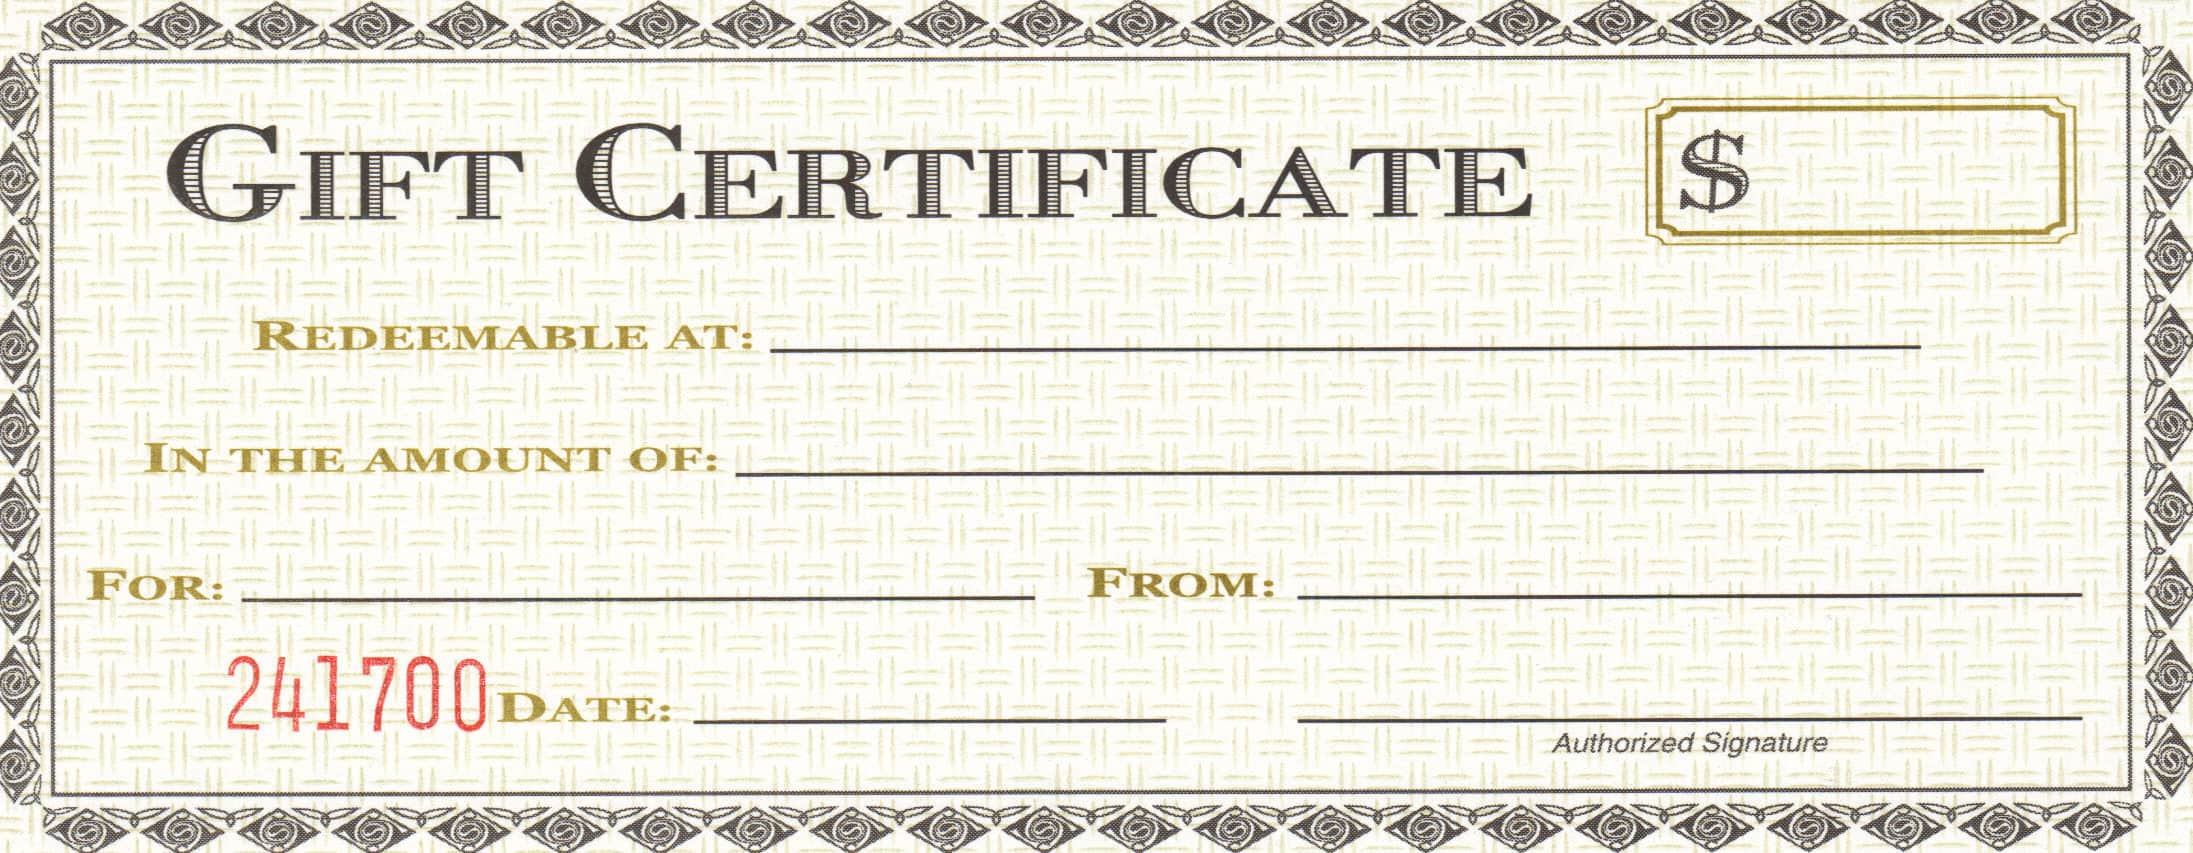 free non download gift certificate template word